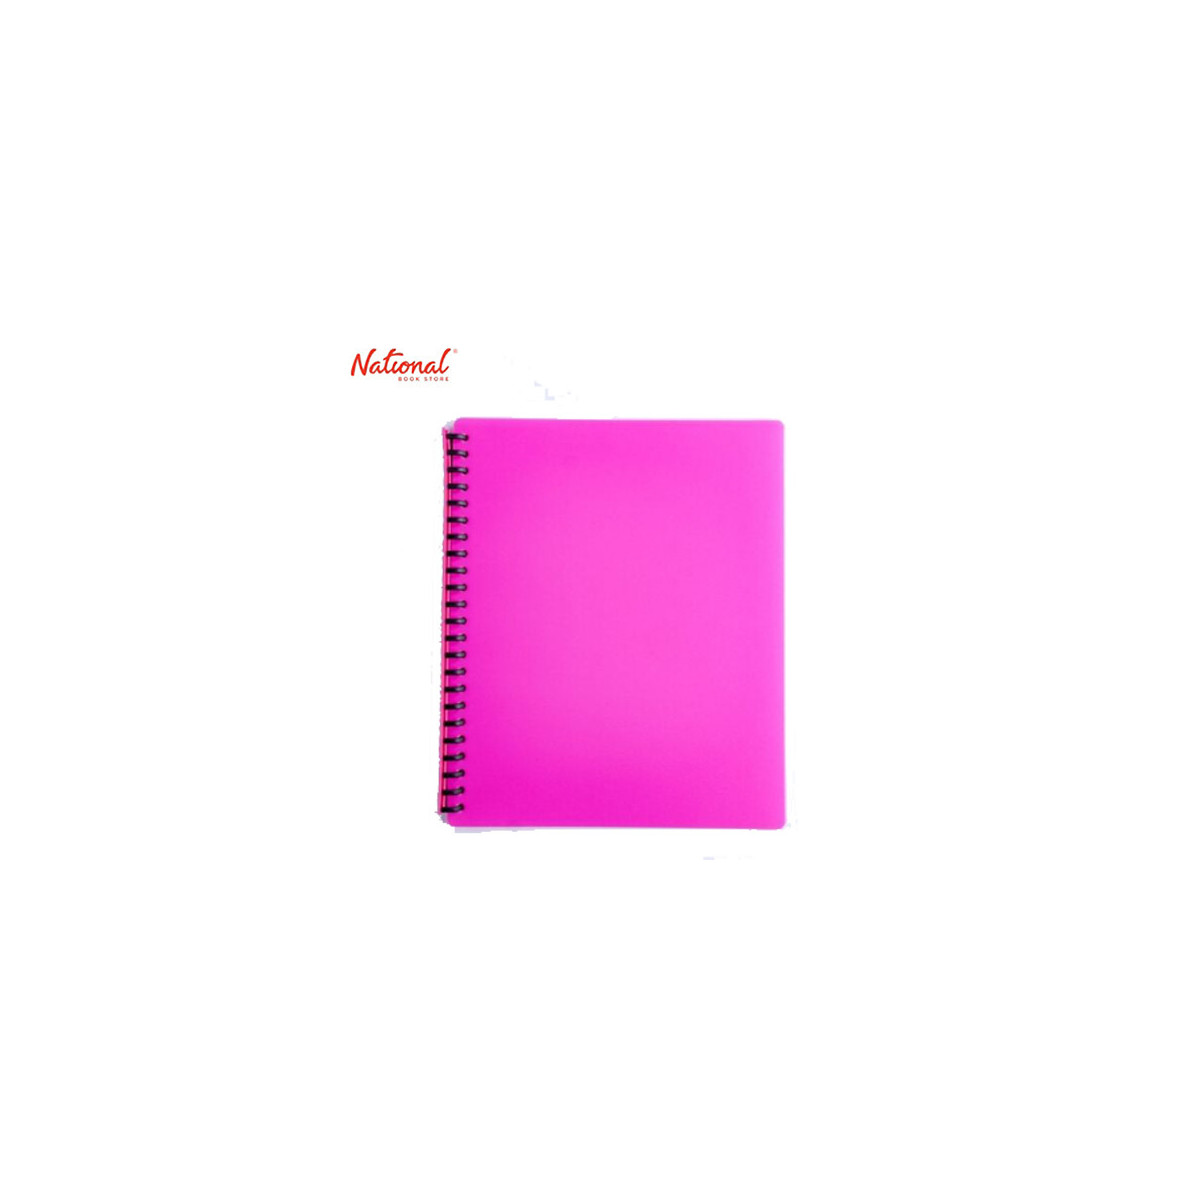 EVO Clearbook Refillable A4 20Sheets 23Holes Neon Pink